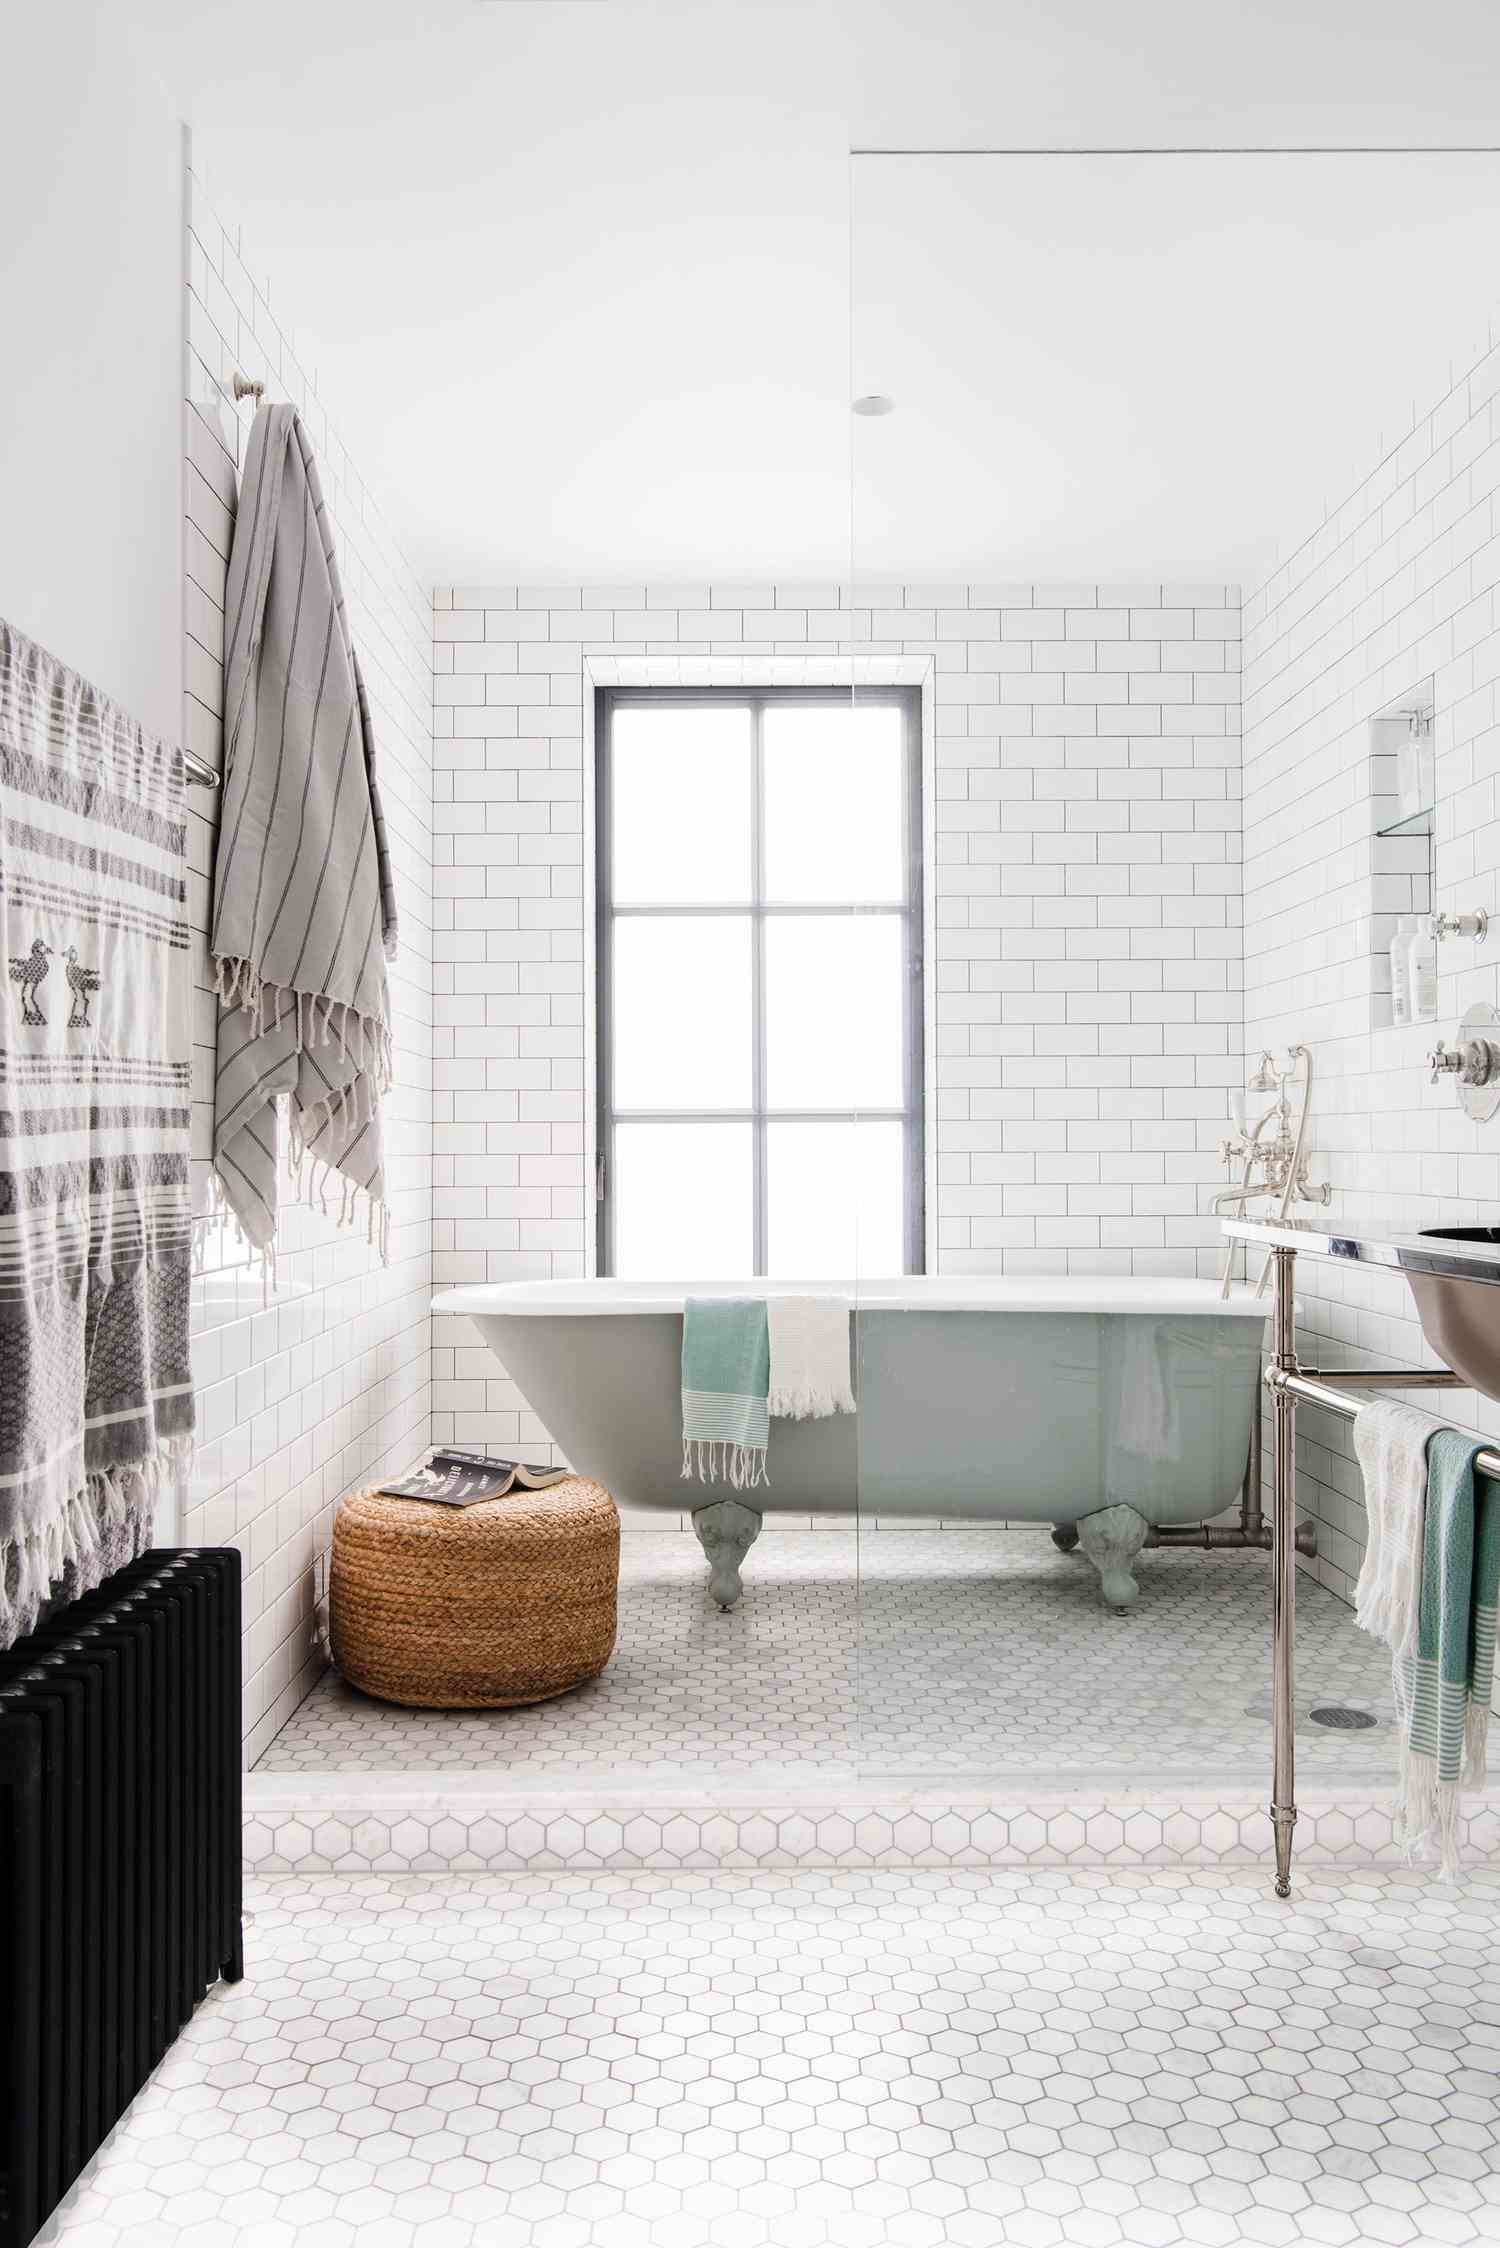 How to Upgrade Your Bathroom Without Renovating It | Martha Stewart